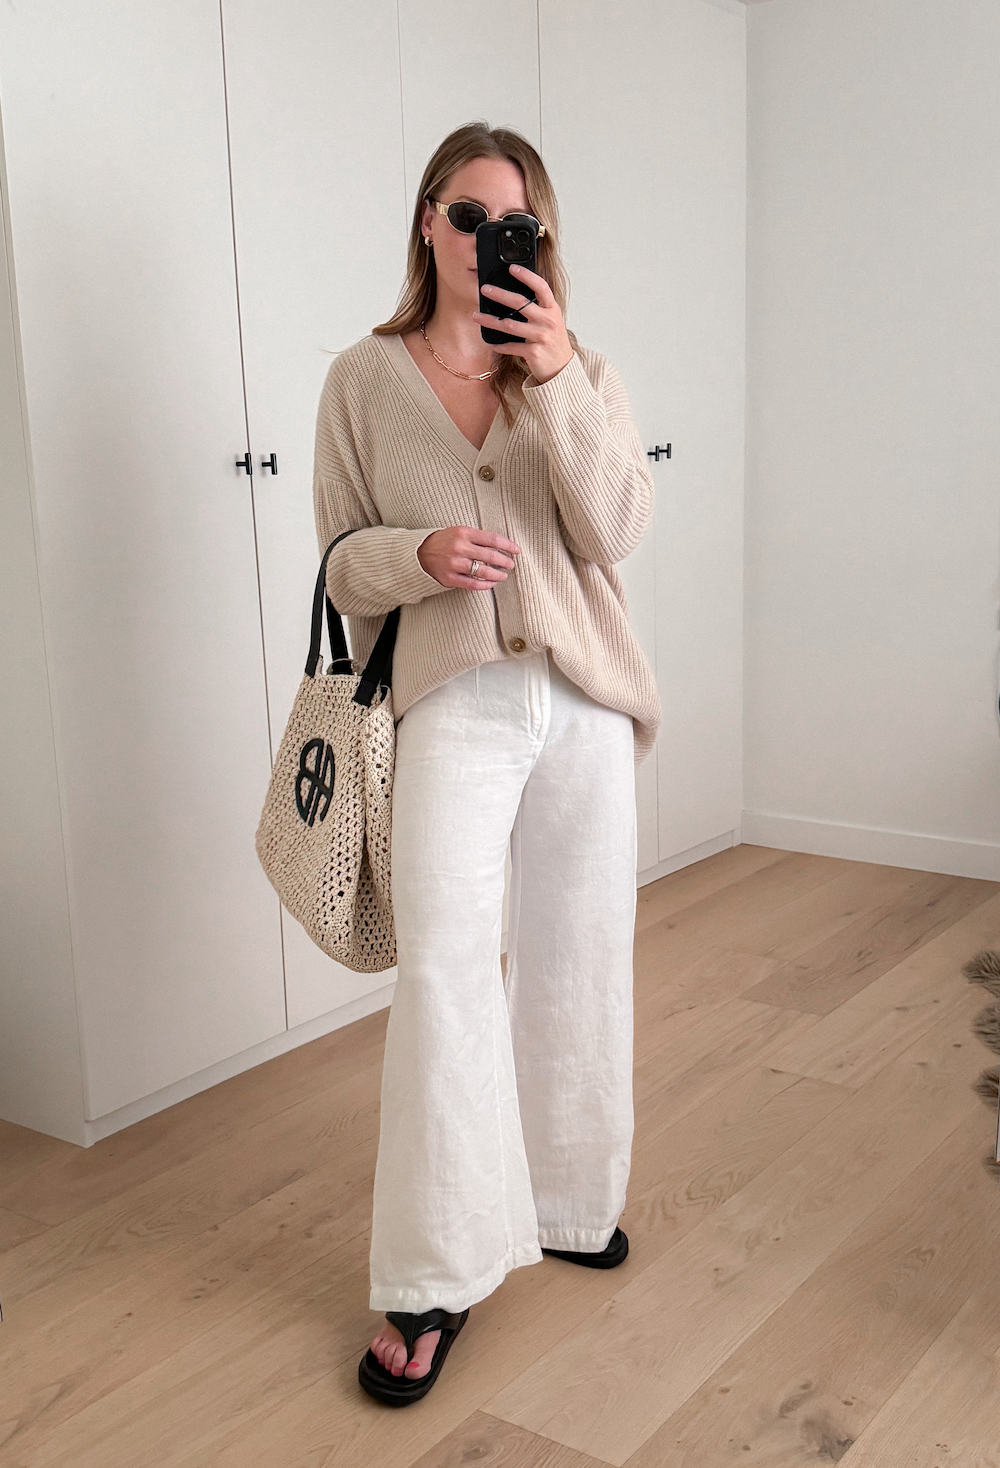 Christal wearing linen pants and an oversized cardigan with a straw bag and black flip flops.